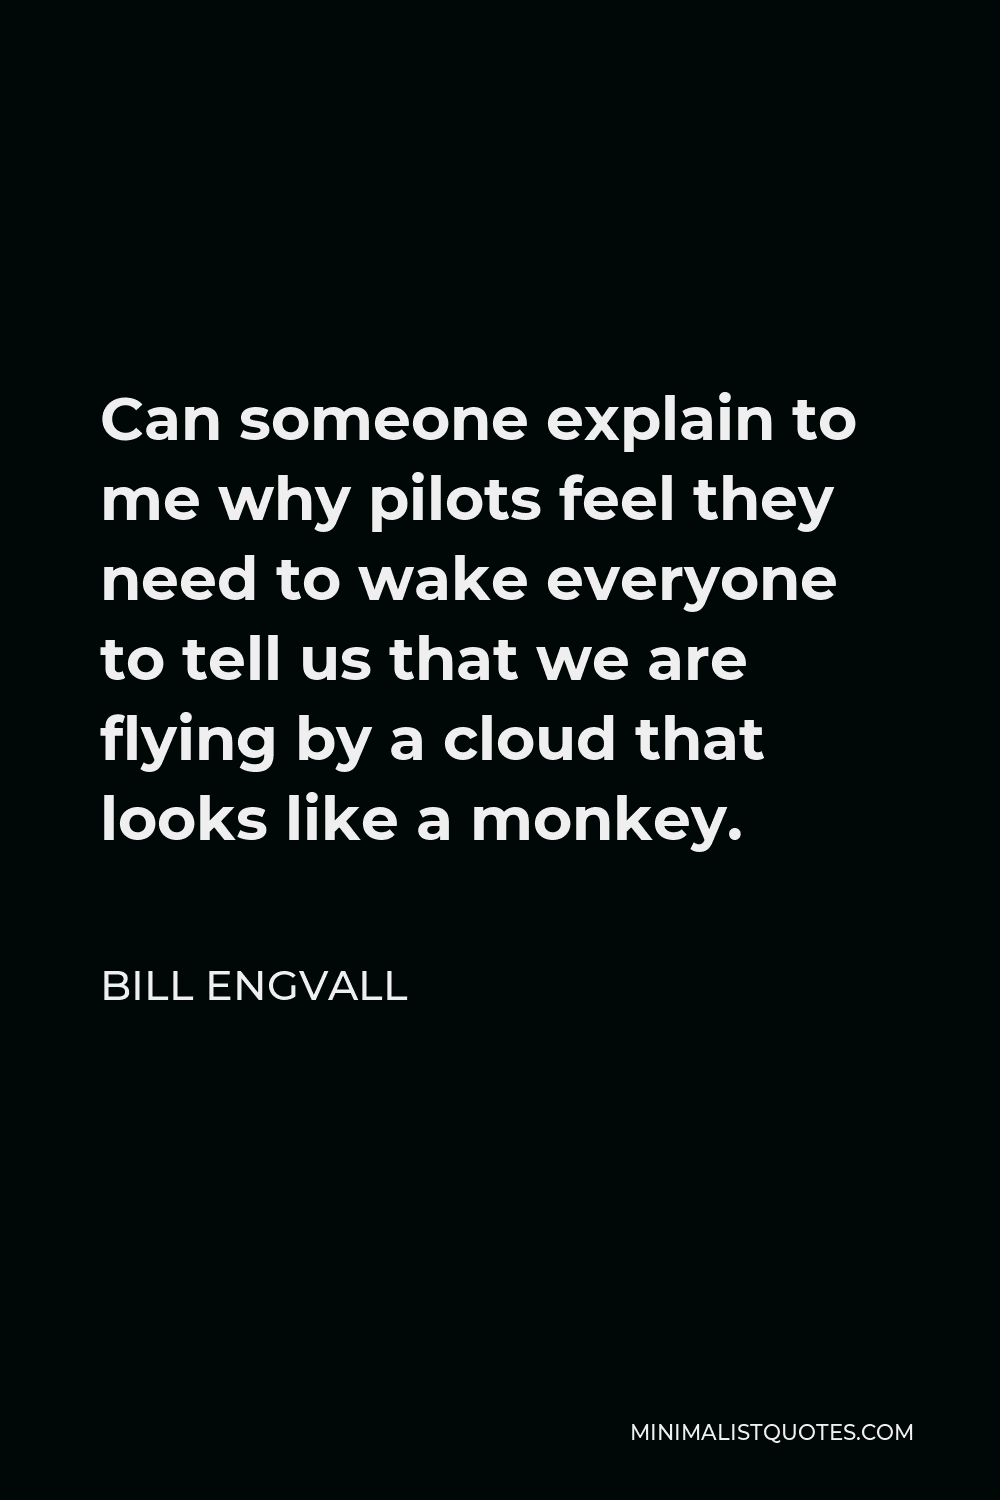 Bill Engvall Quote - Can someone explain to me why pilots feel they need to wake everyone to tell us that we are flying by a cloud that looks like a monkey.